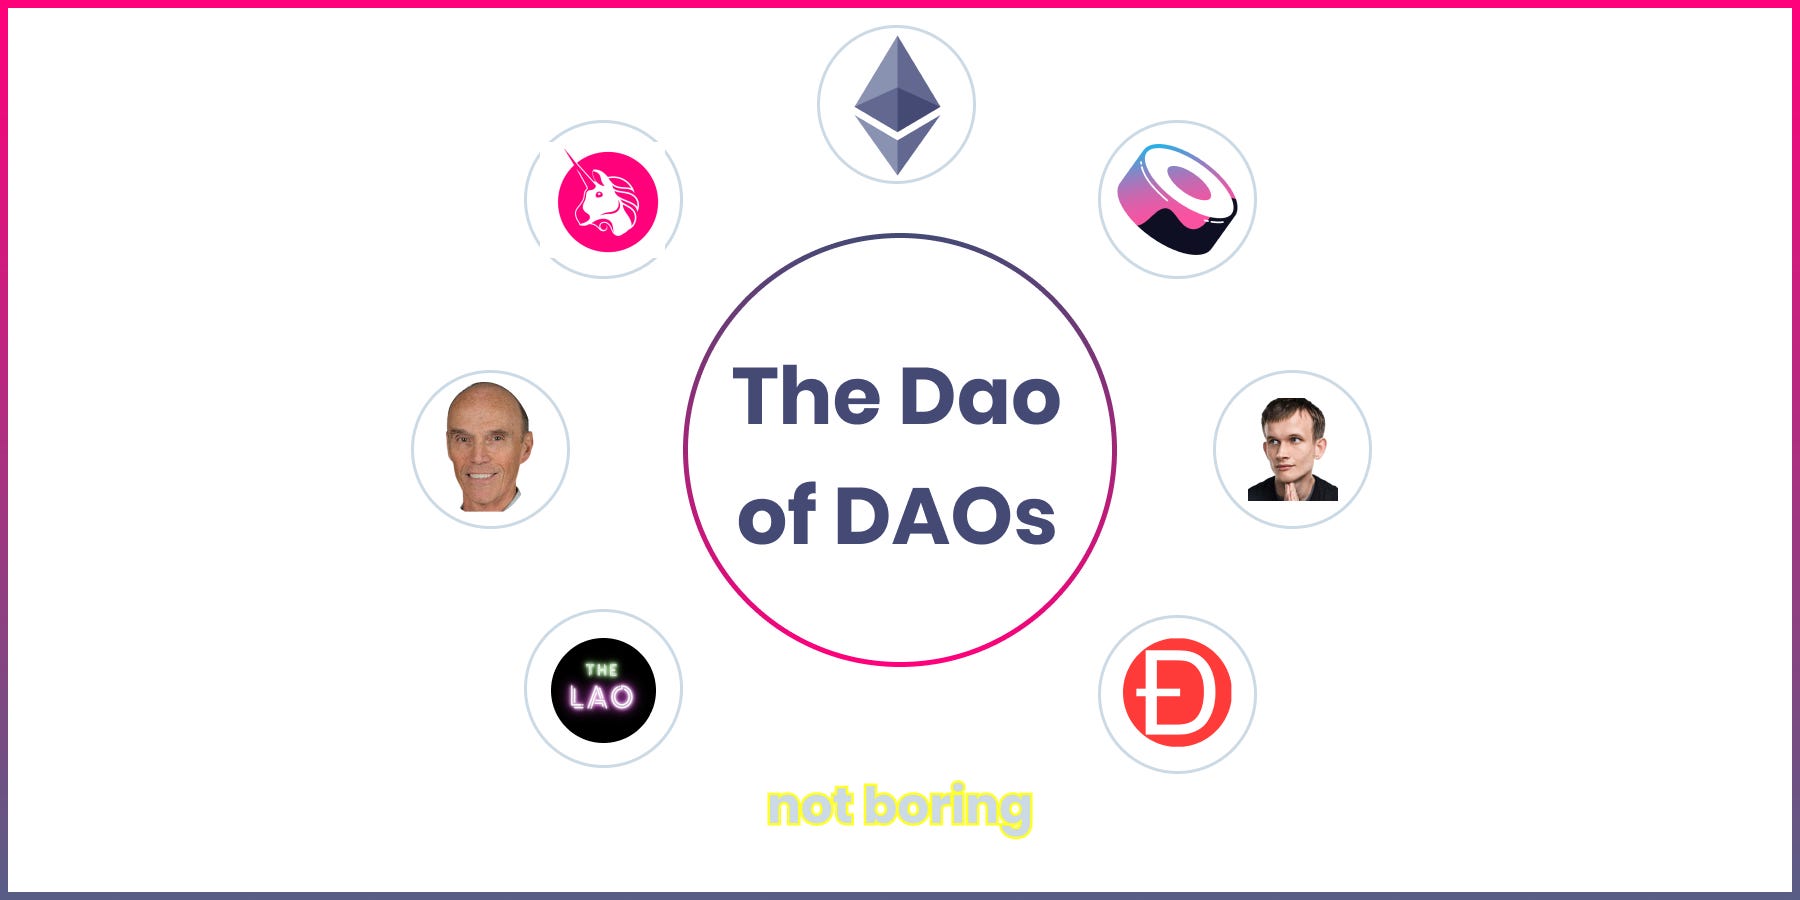 The Dao of DAOs